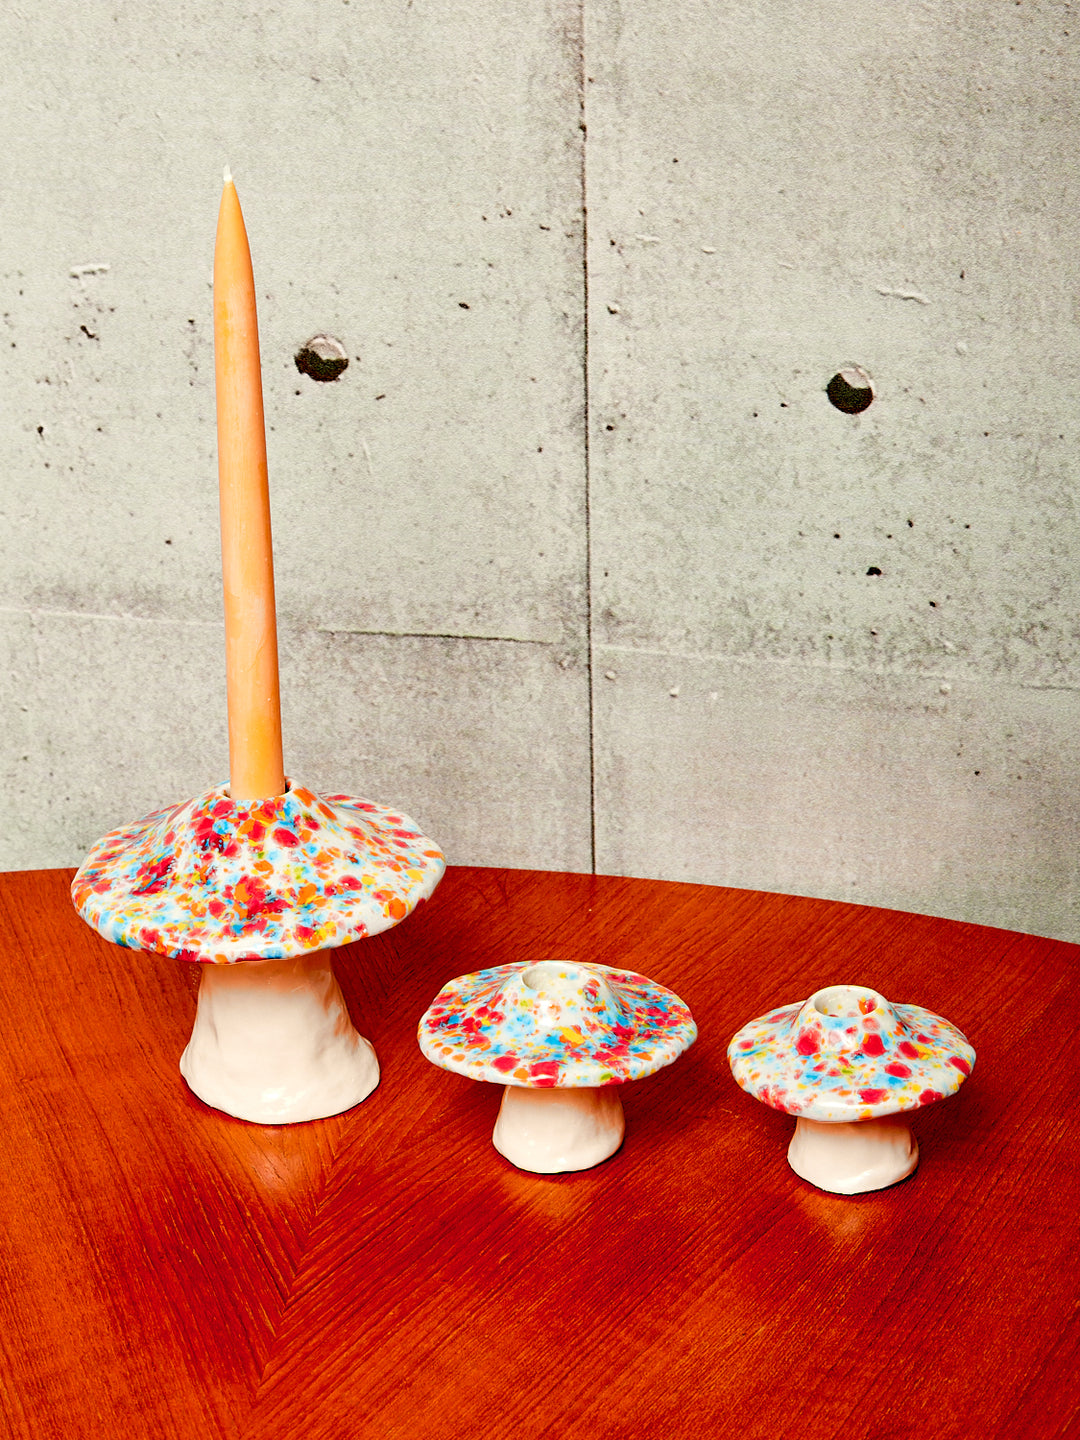 Psychedelic Mushroom Candle - Candles - Home & Office - Products